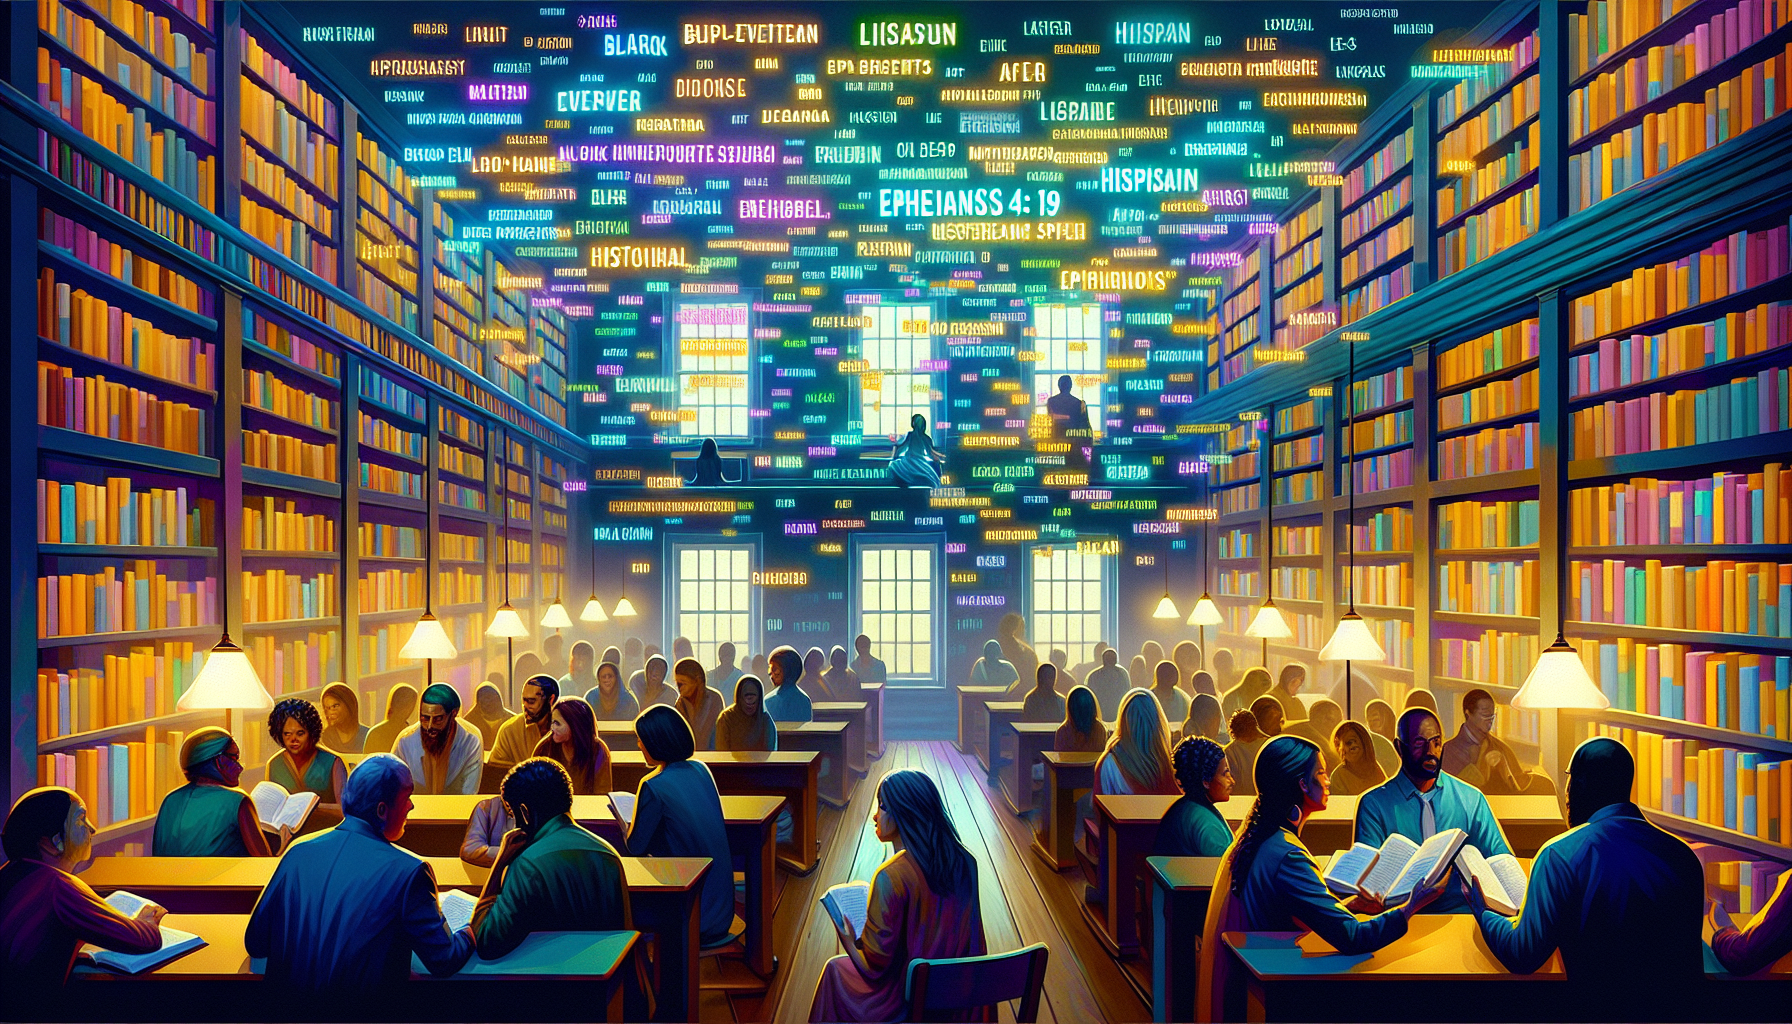 An inspirational digital artwork depicting a serene library setting where people of diverse backgrounds are sharing uplifting words with one another, surrounded by floating, glowing texts of Ephesians